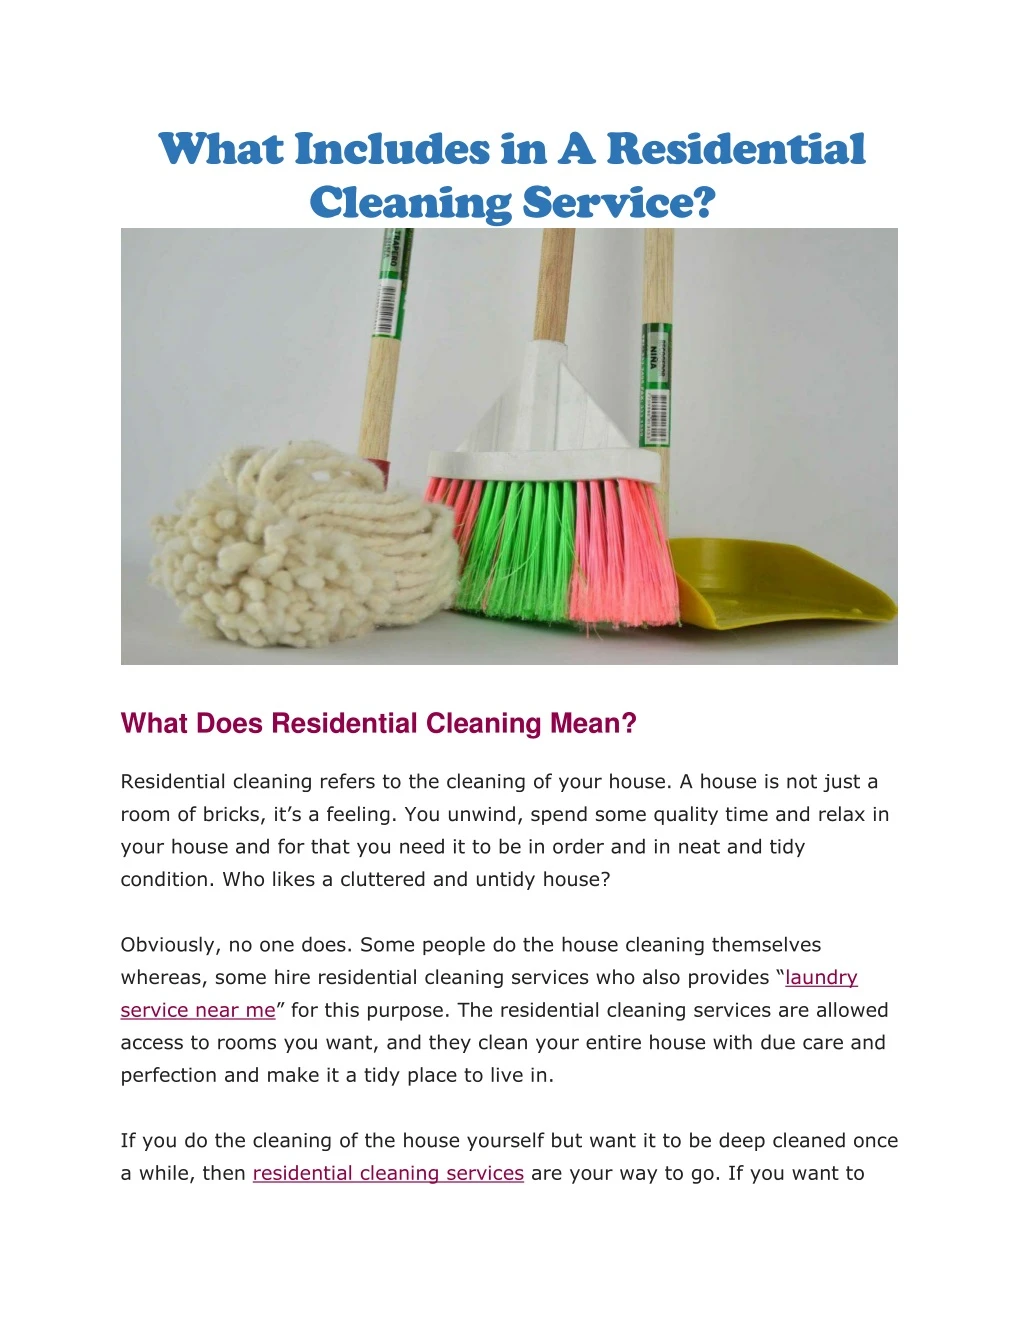 what includes in a residential cleaning service